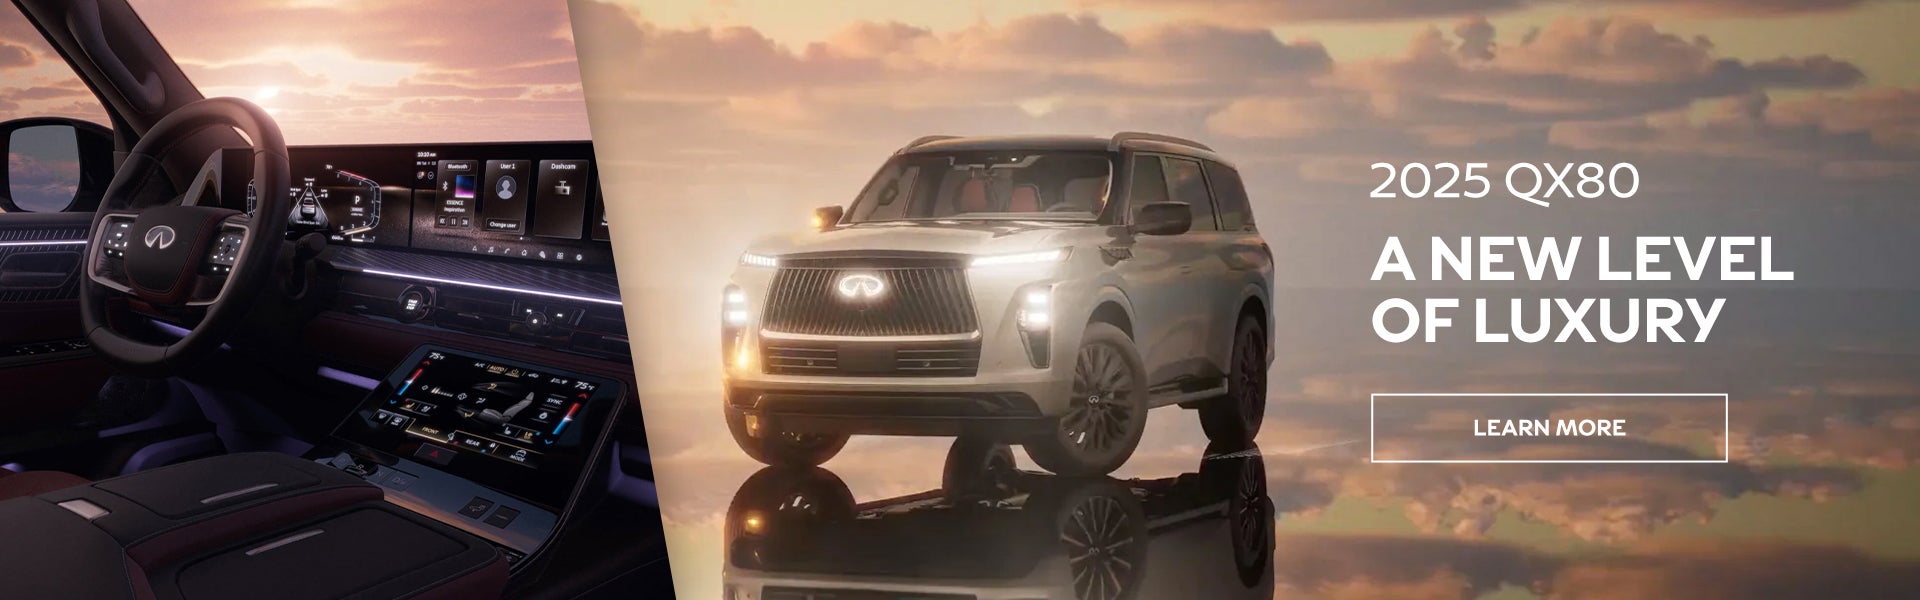 Preview the New 2025 QX80